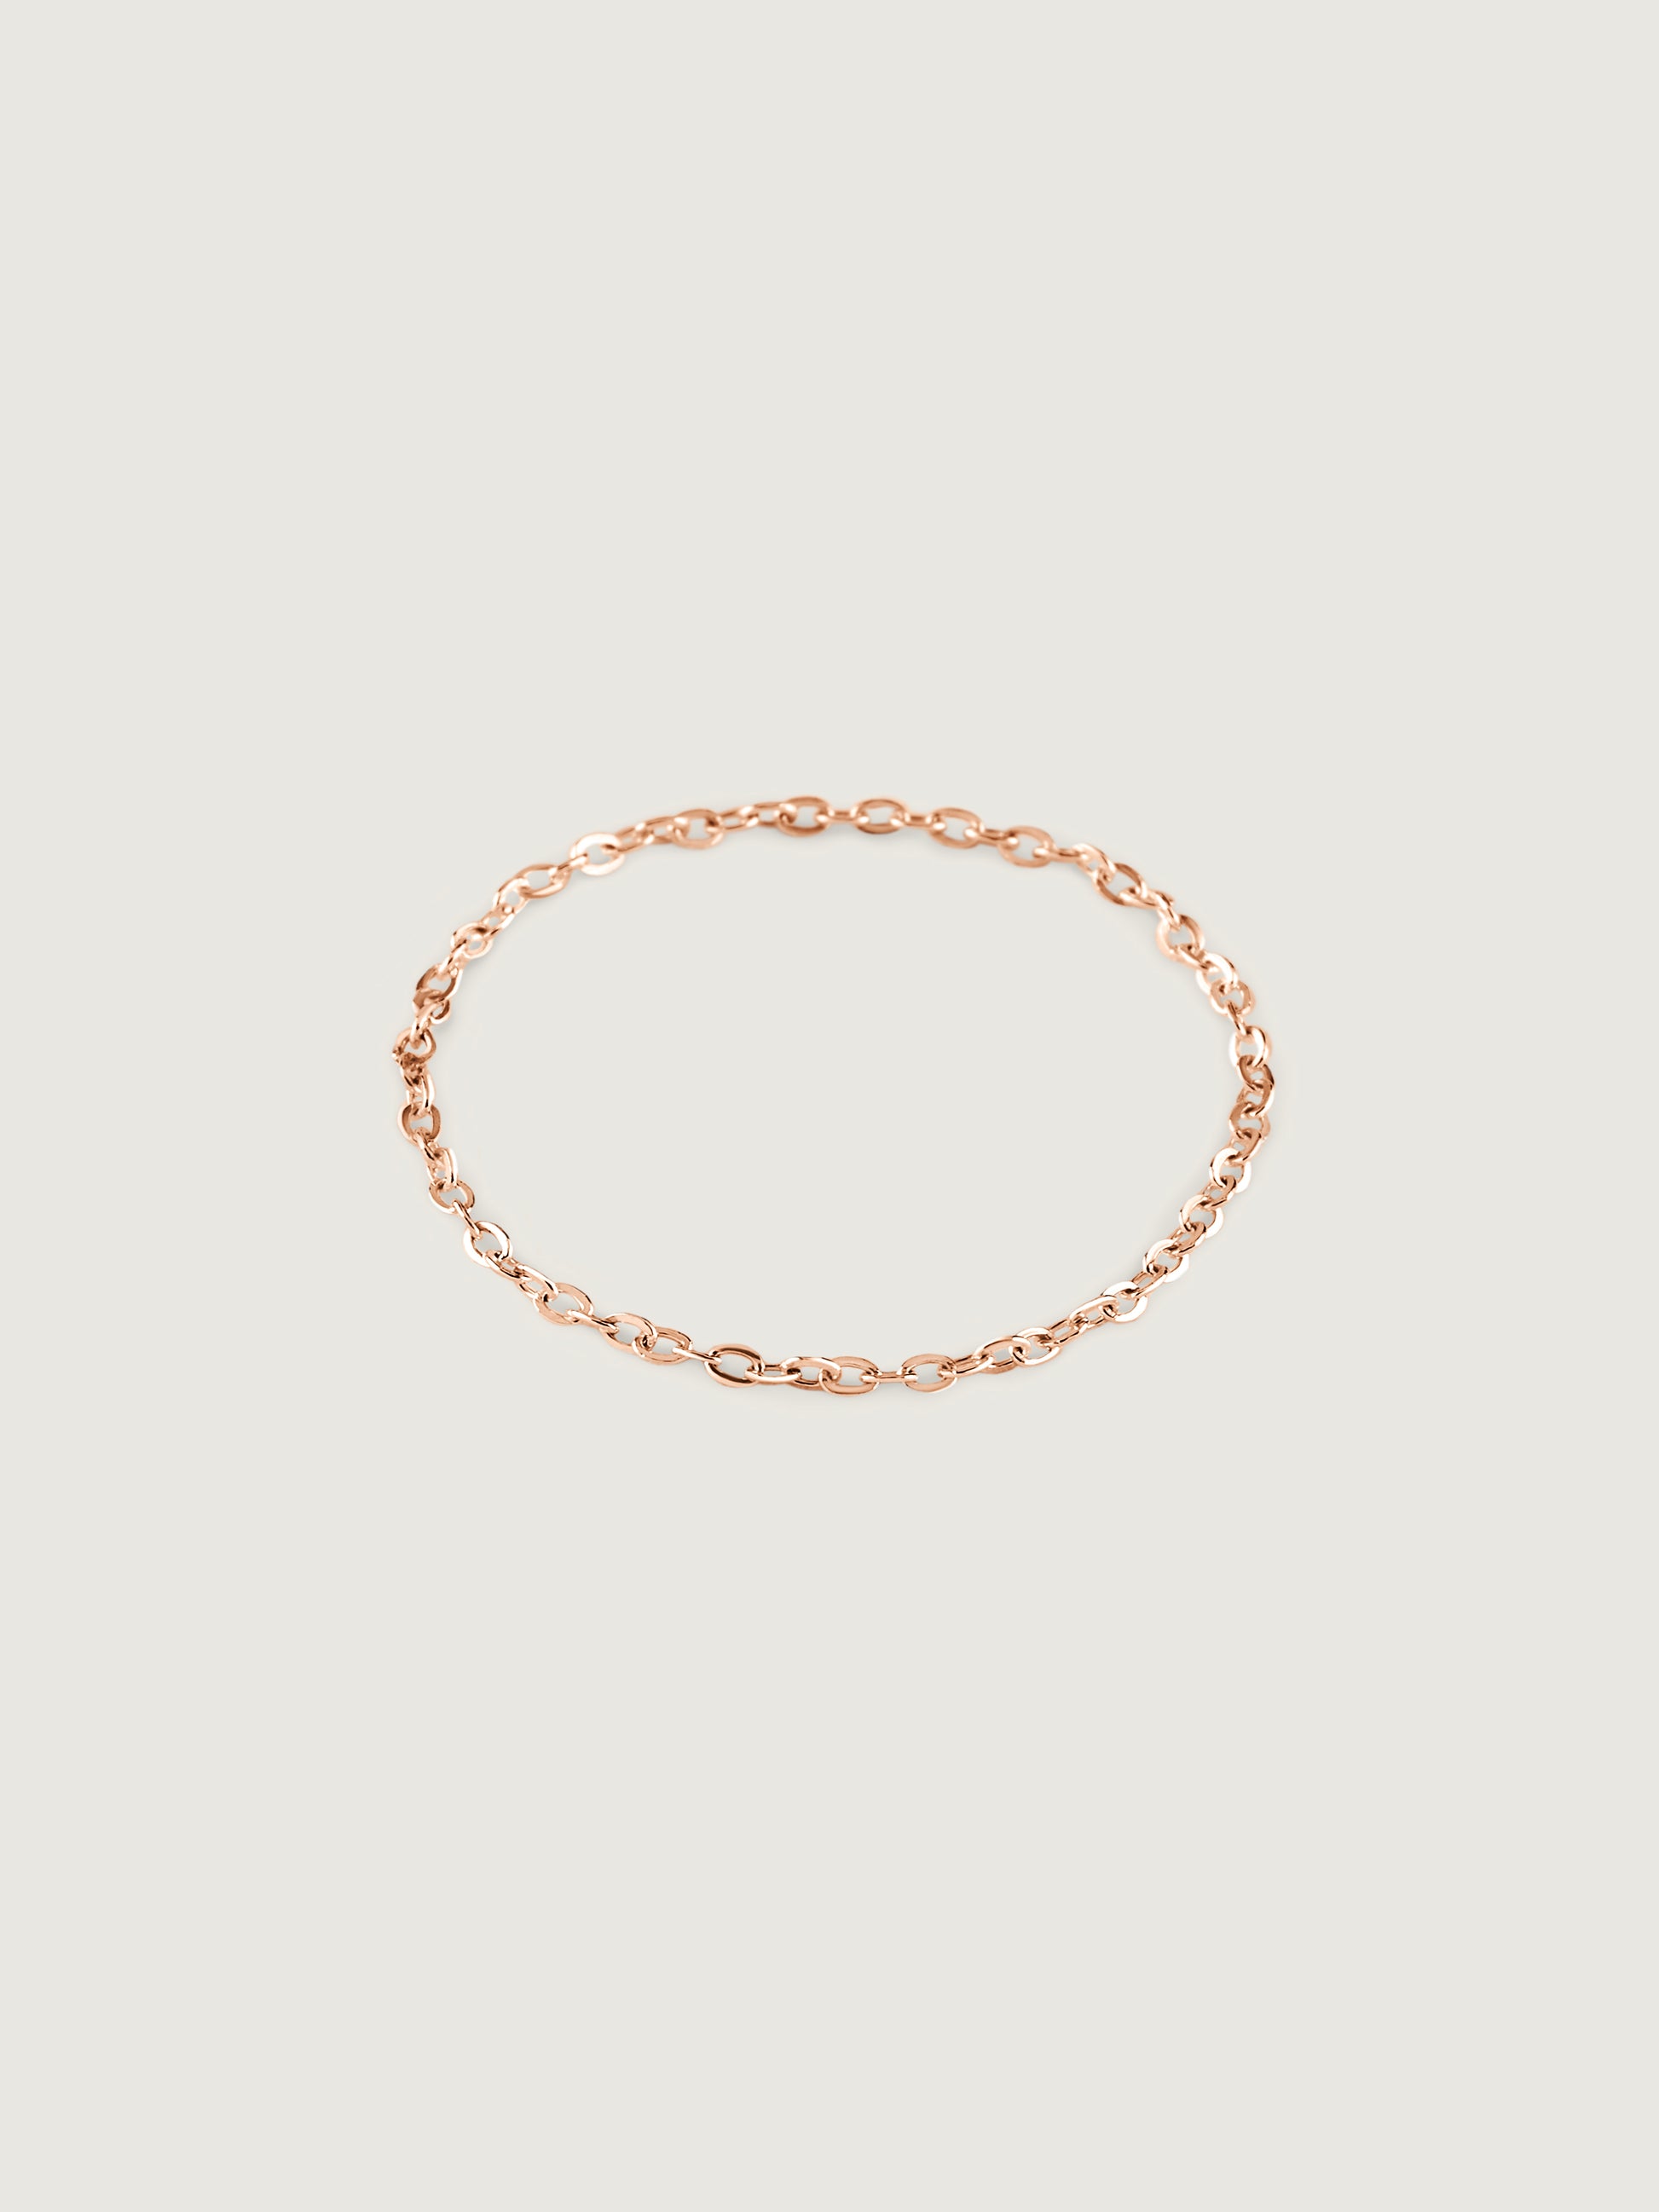 Clair De Lune 14k Chain Ring in Yellow Gold